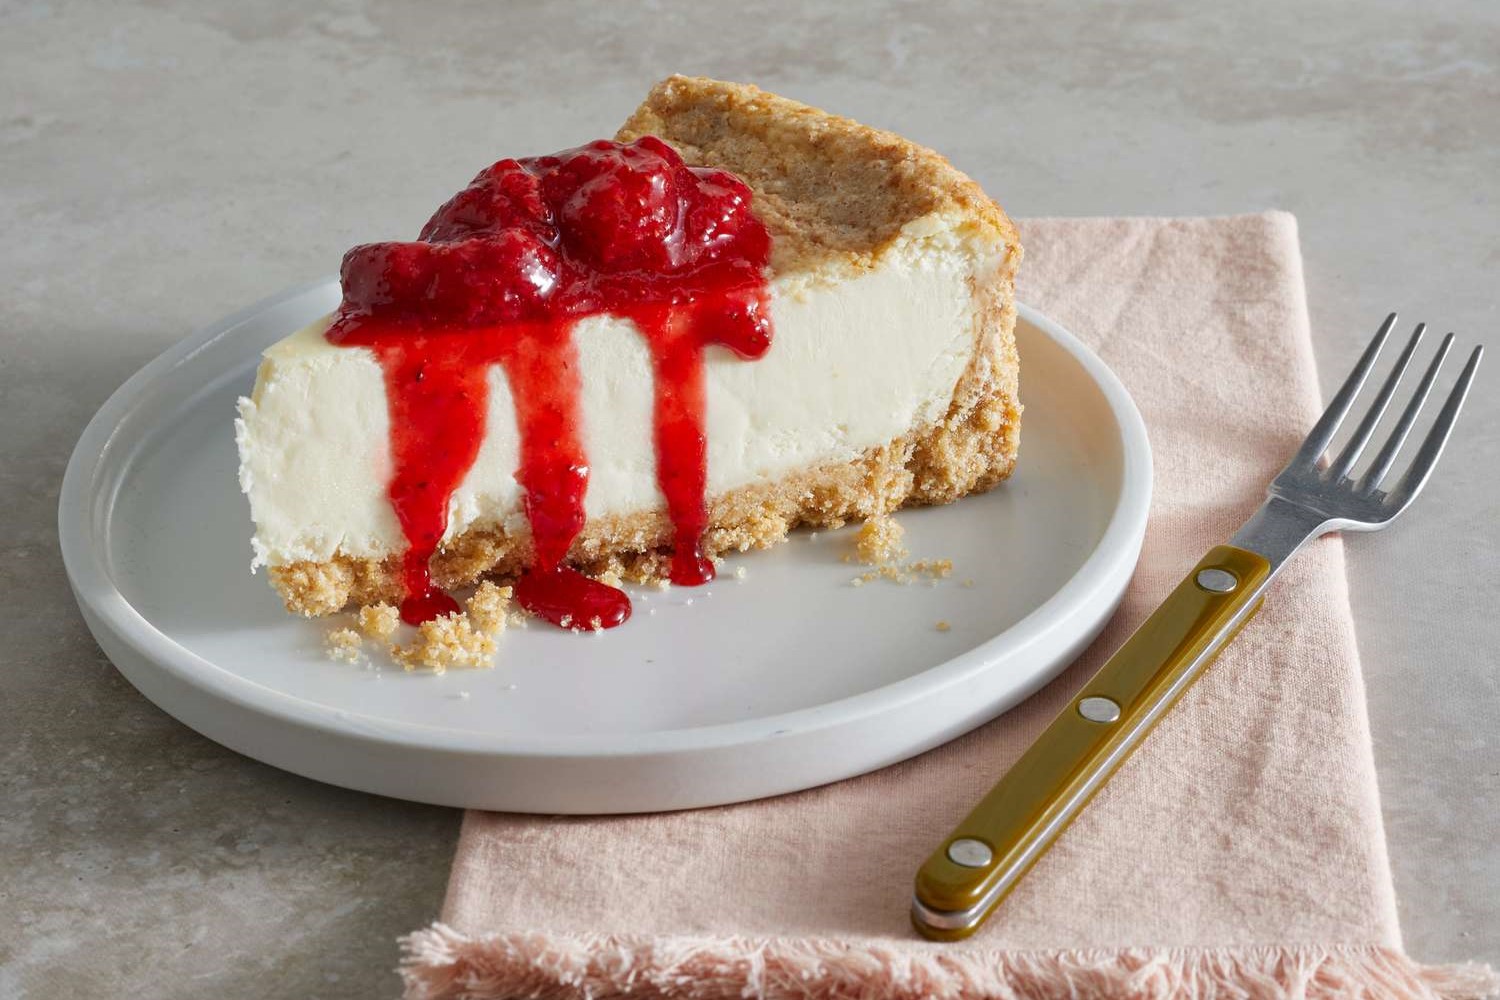 11-strawberry-cheesecake-nutrition-facts